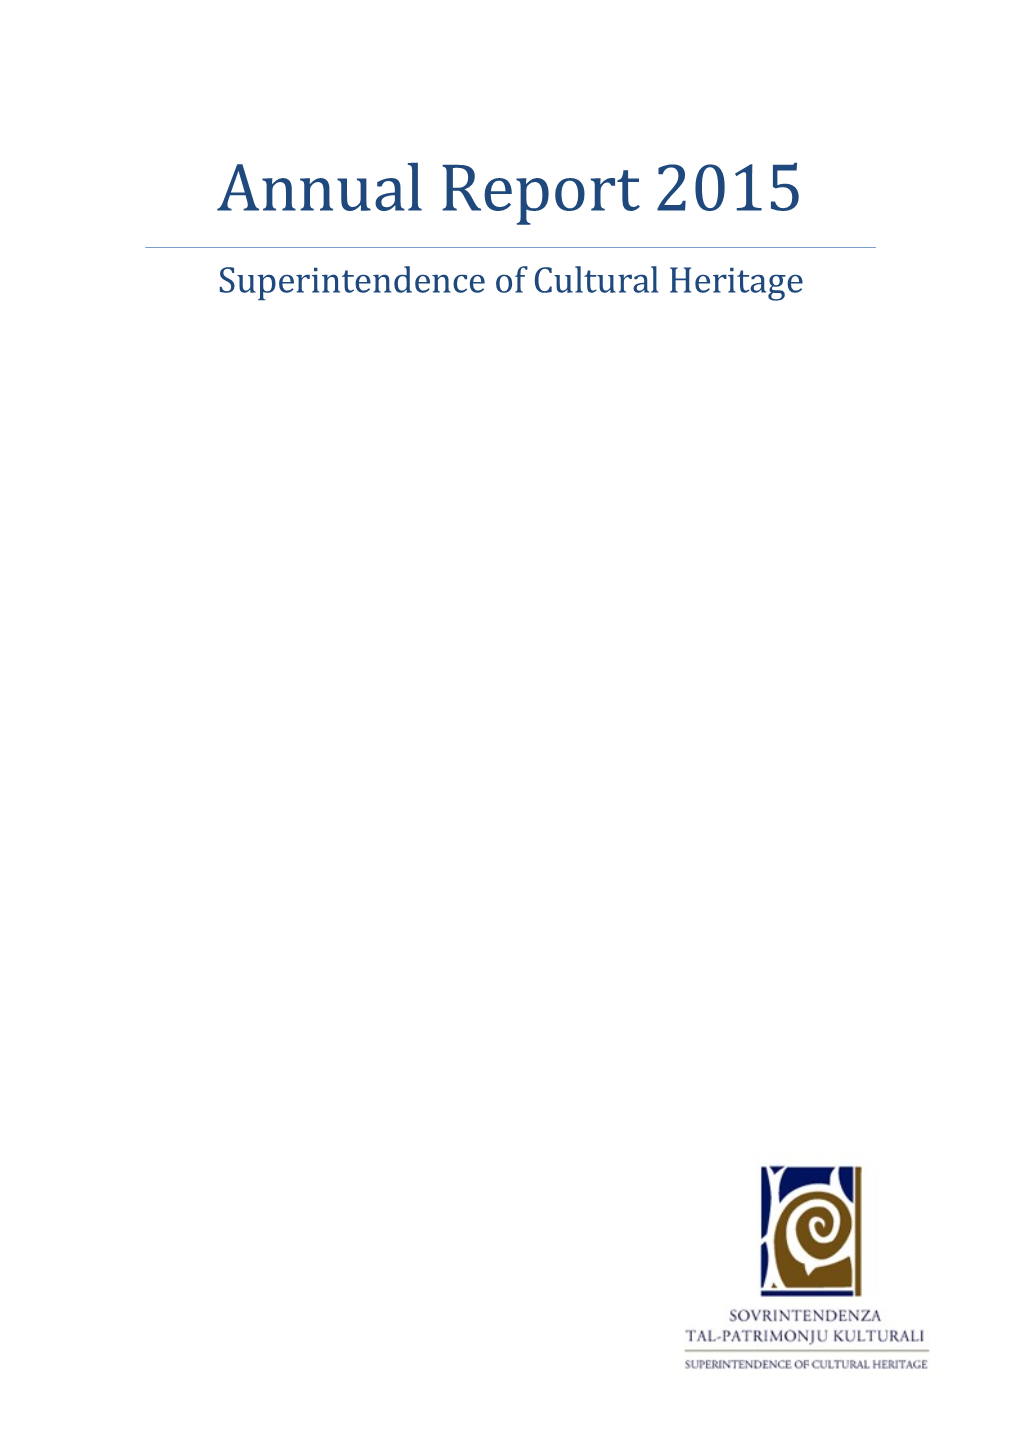 Annual Report 2015 Superintendence of Cultural Heritage